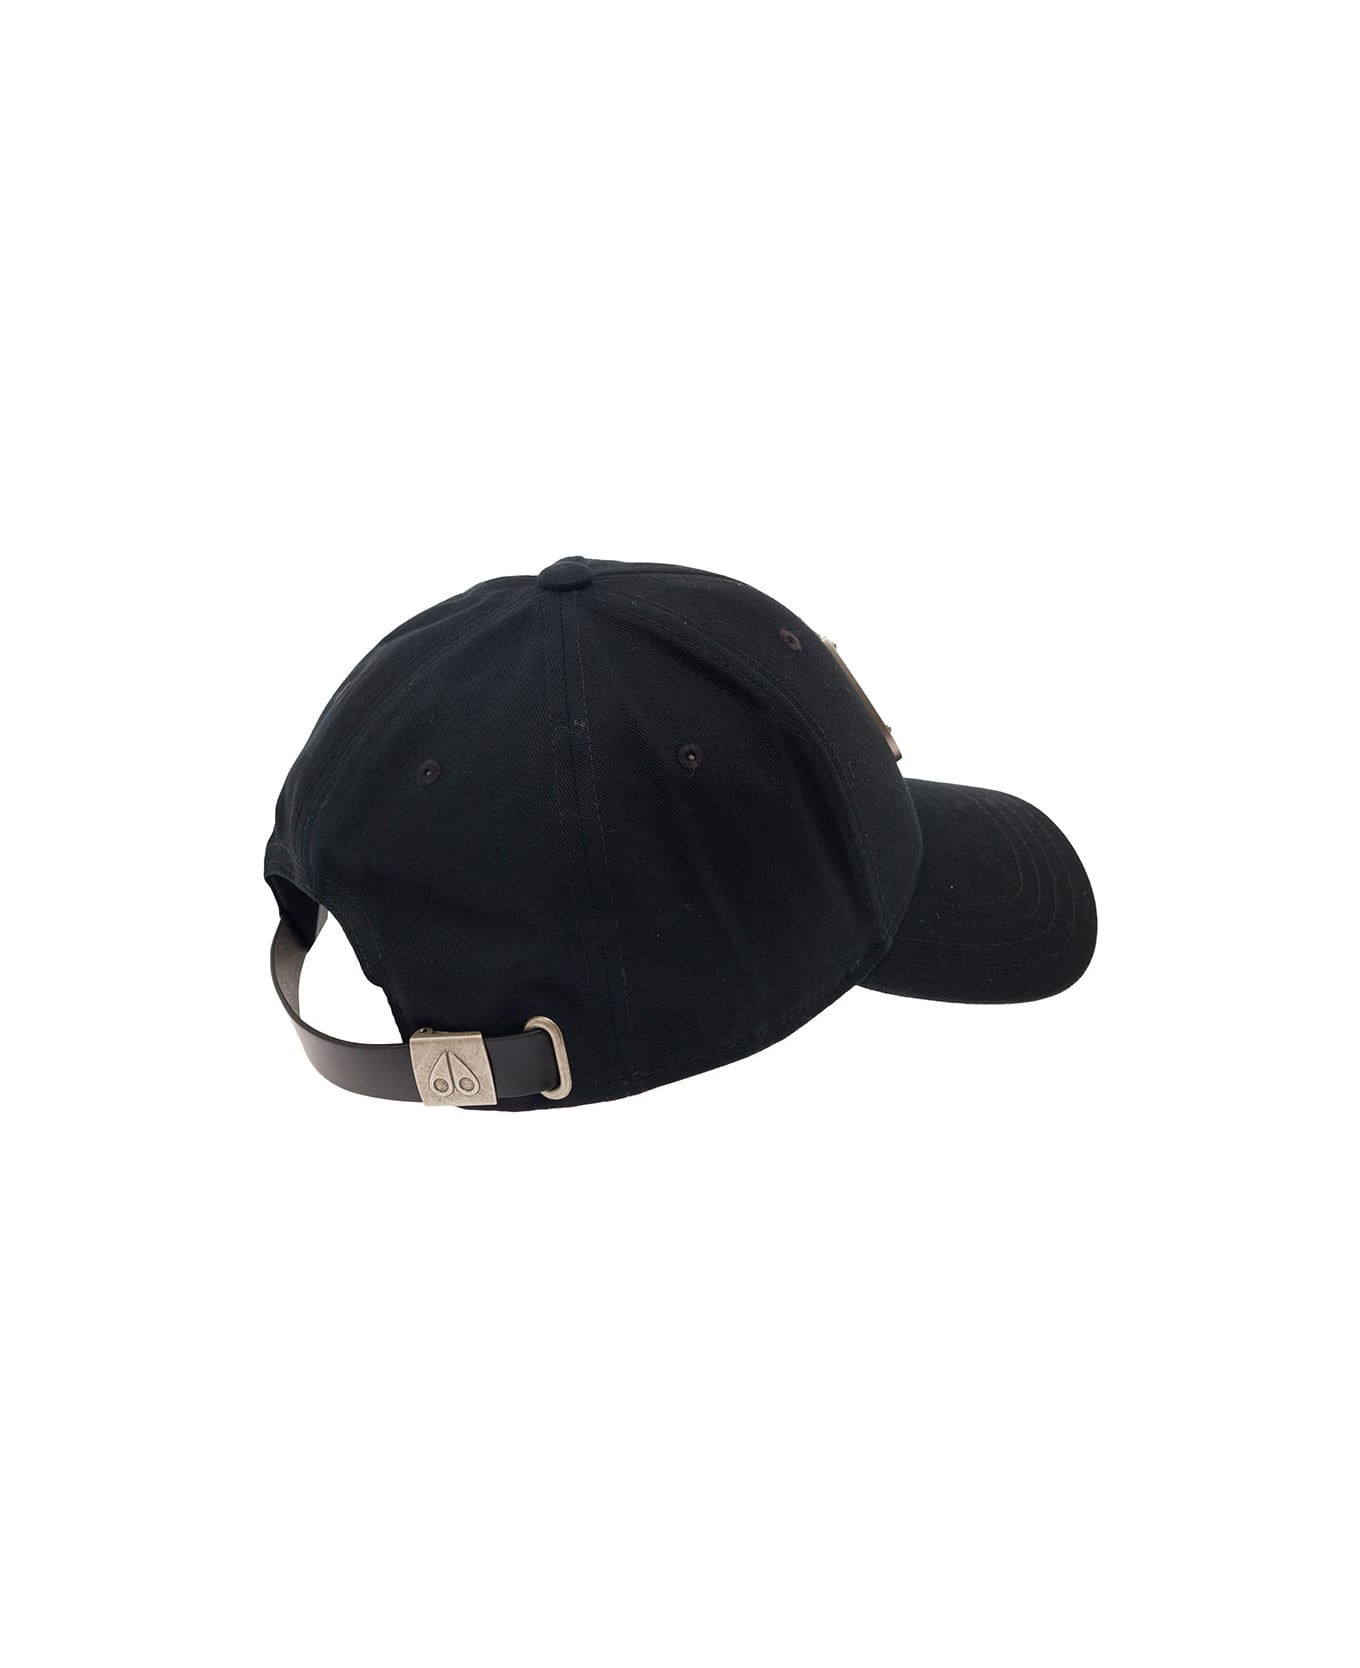 Moose Knuckles Black Baseball Cap With Metal Logo Patch In Cotton Man - Black